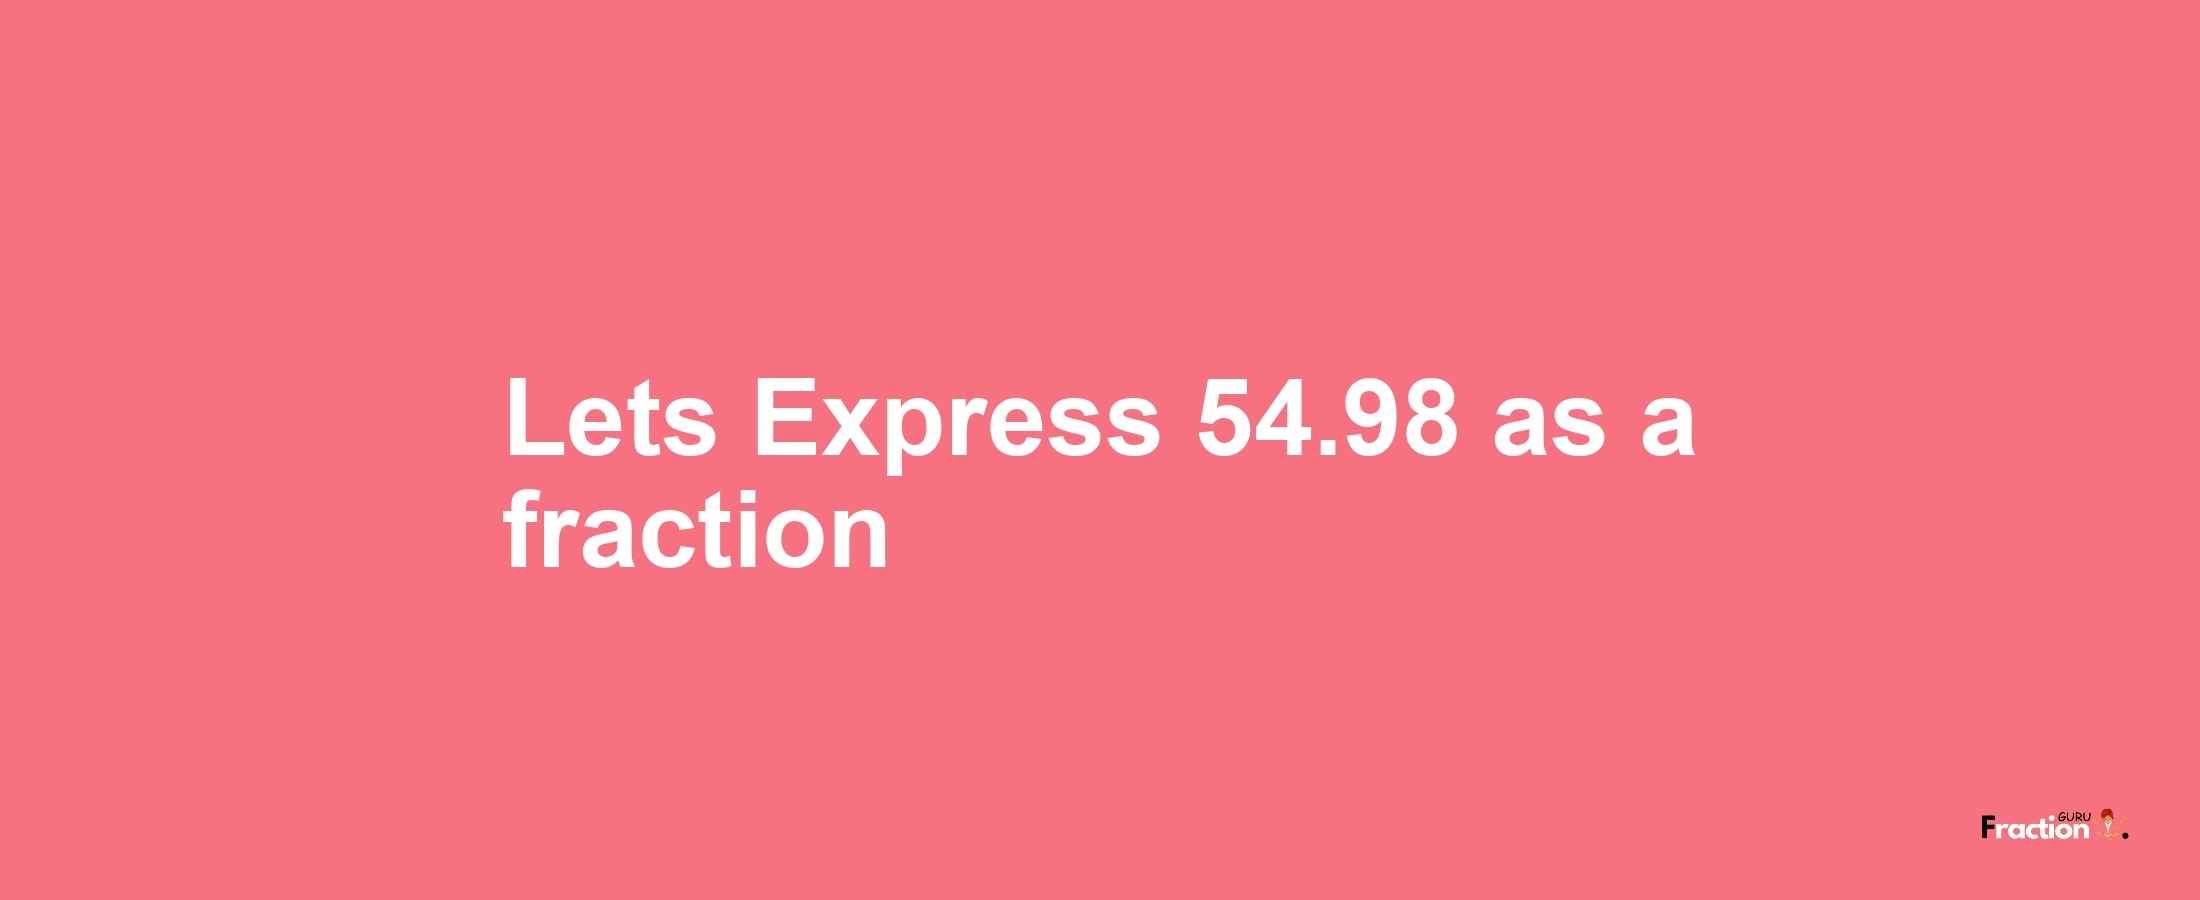 Lets Express 54.98 as afraction